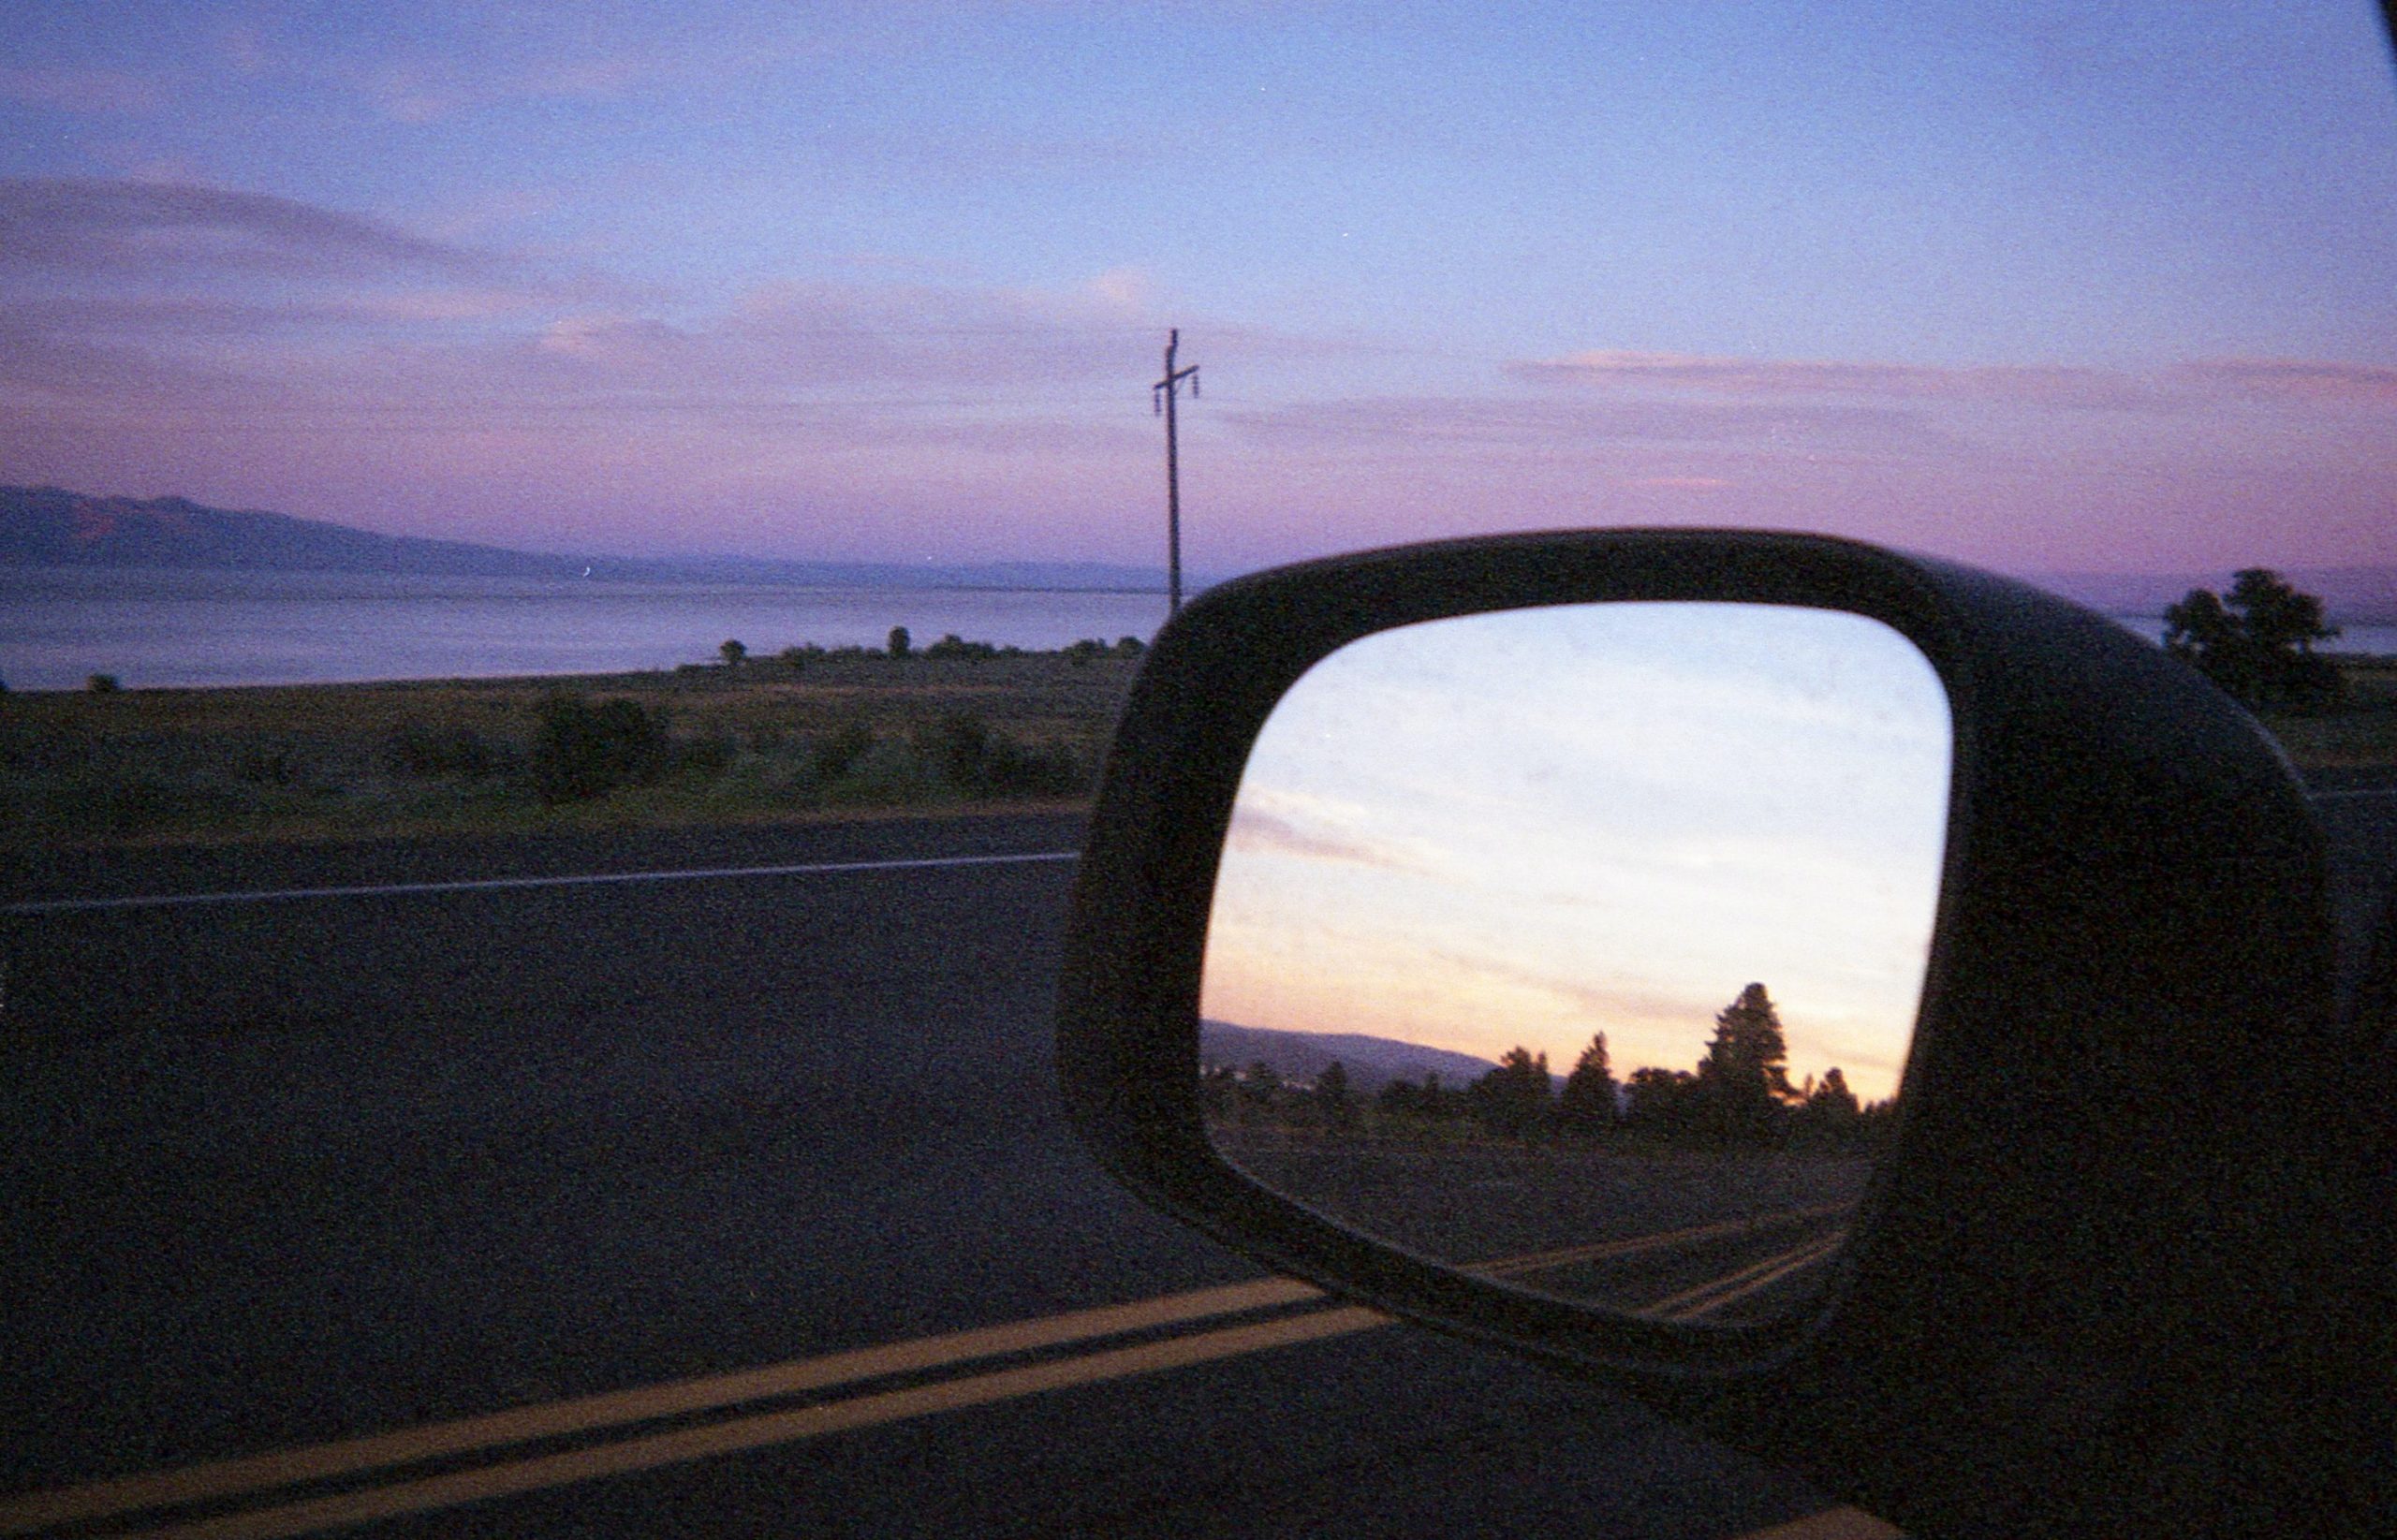 An image at dusk of a rearview mirror and pretty pink clouds.